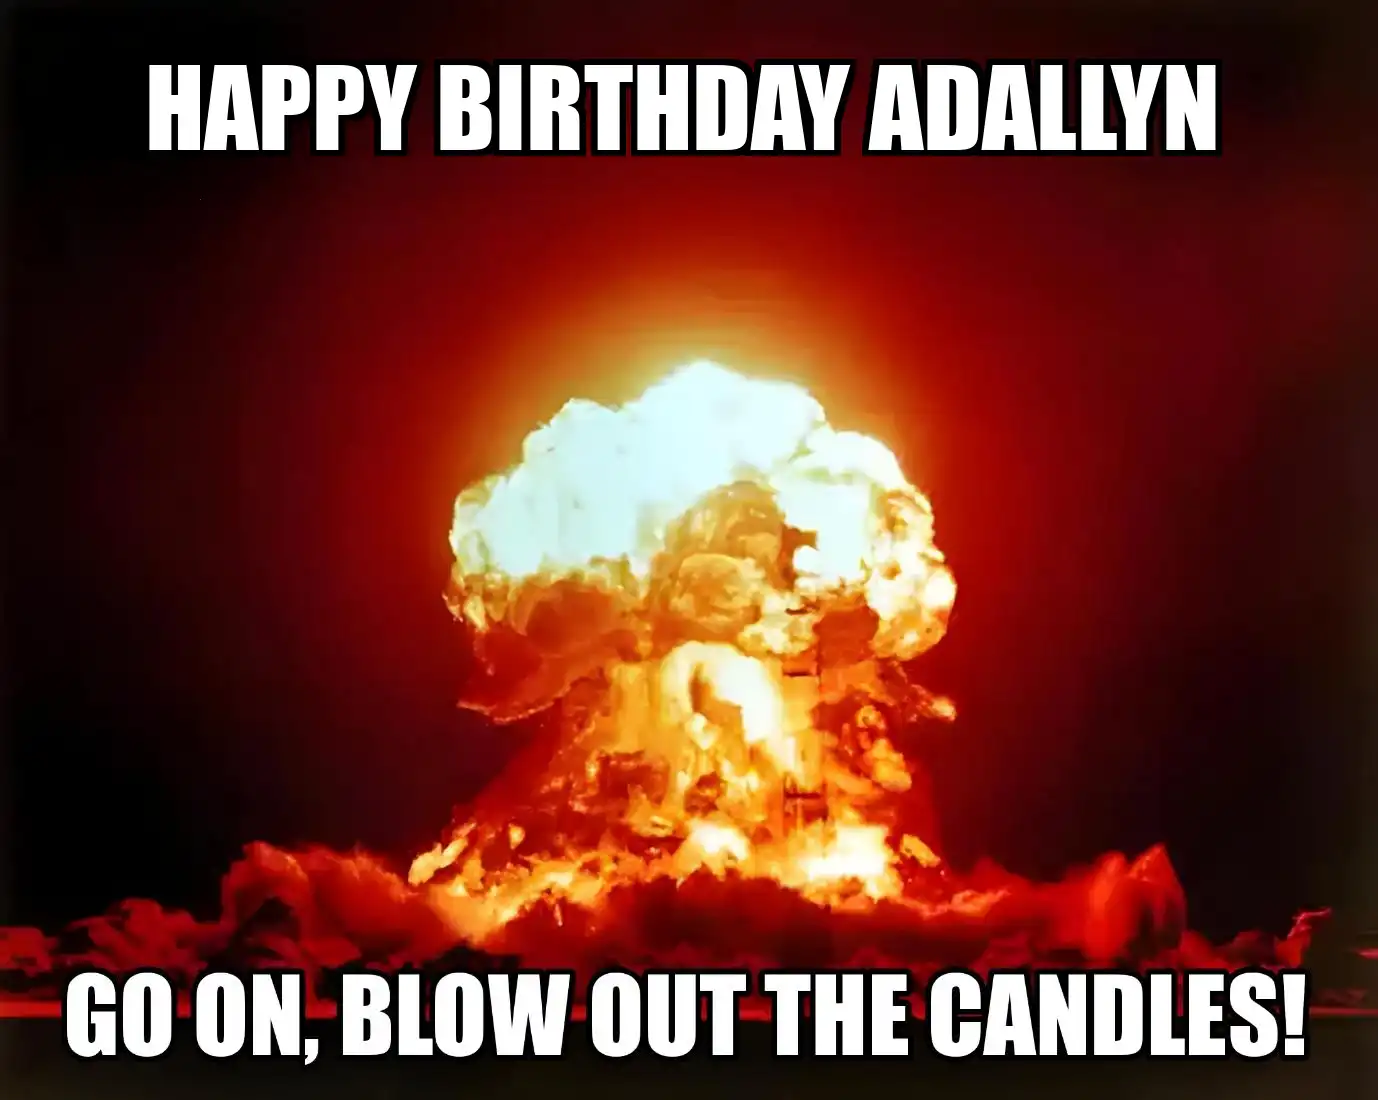 Happy Birthday Adallyn Go On Blow Out The Candles Meme